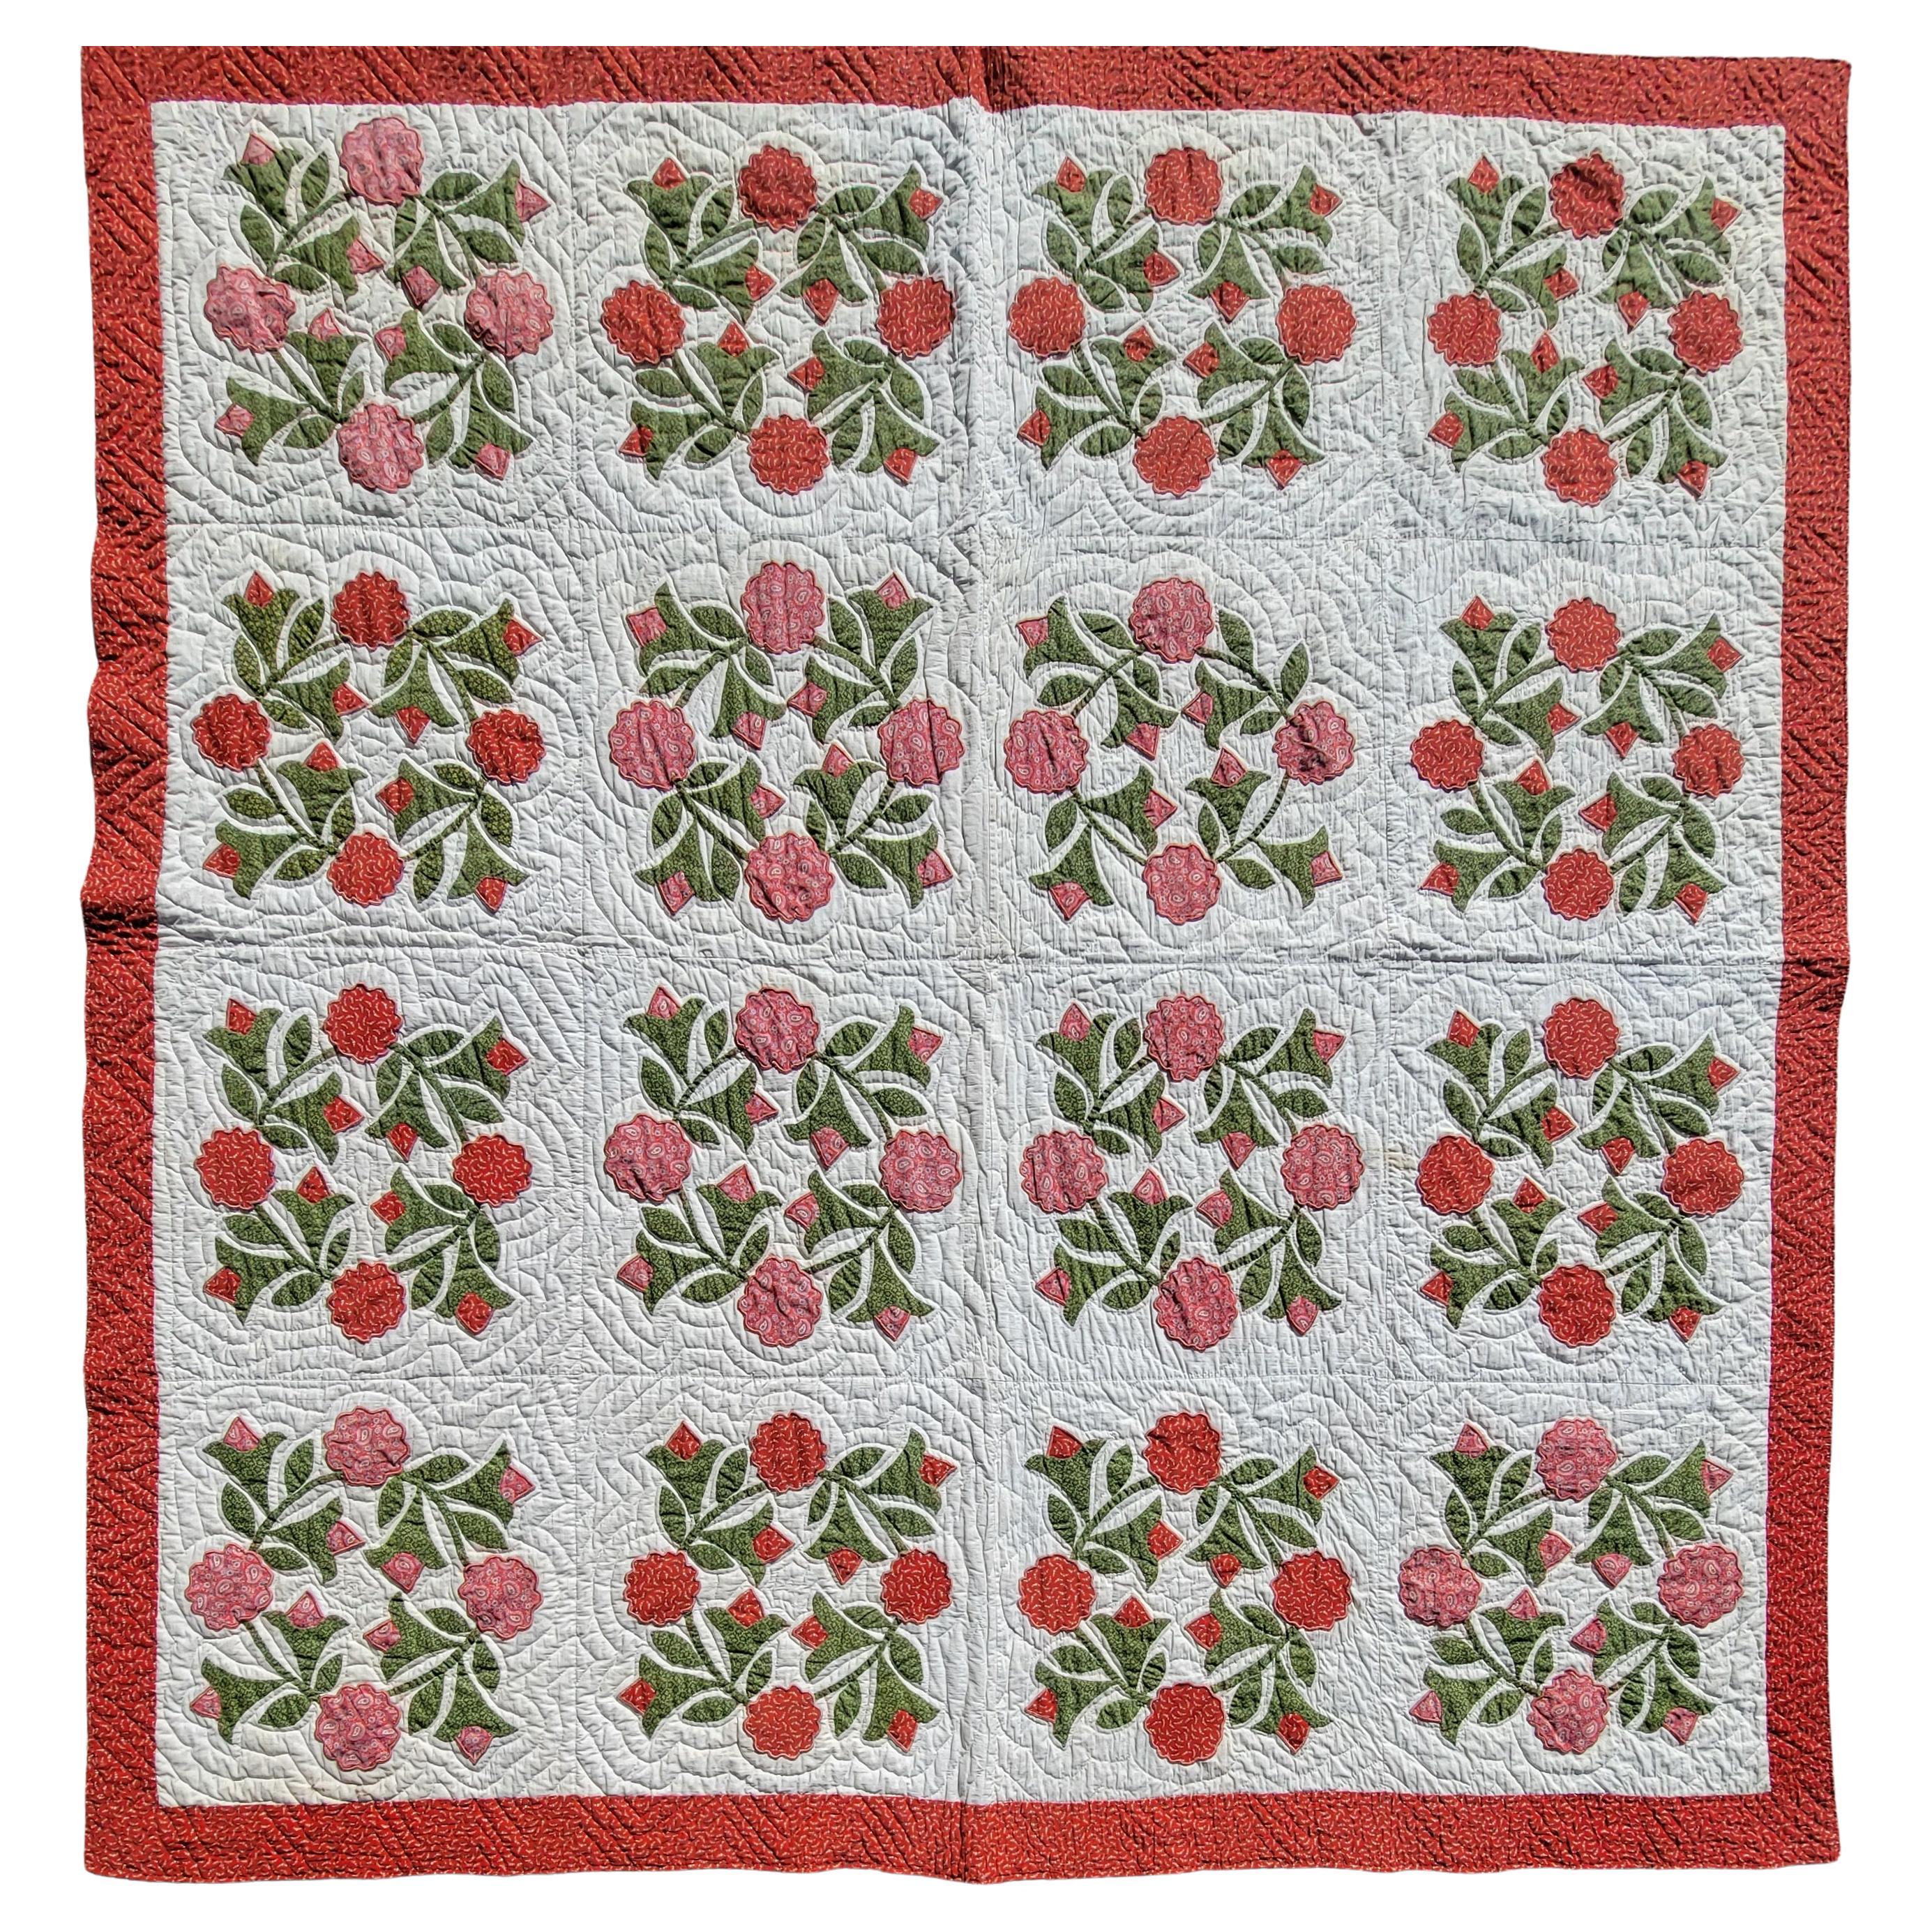 19Thc Applique of Wreath of Roses From Pennsylvania